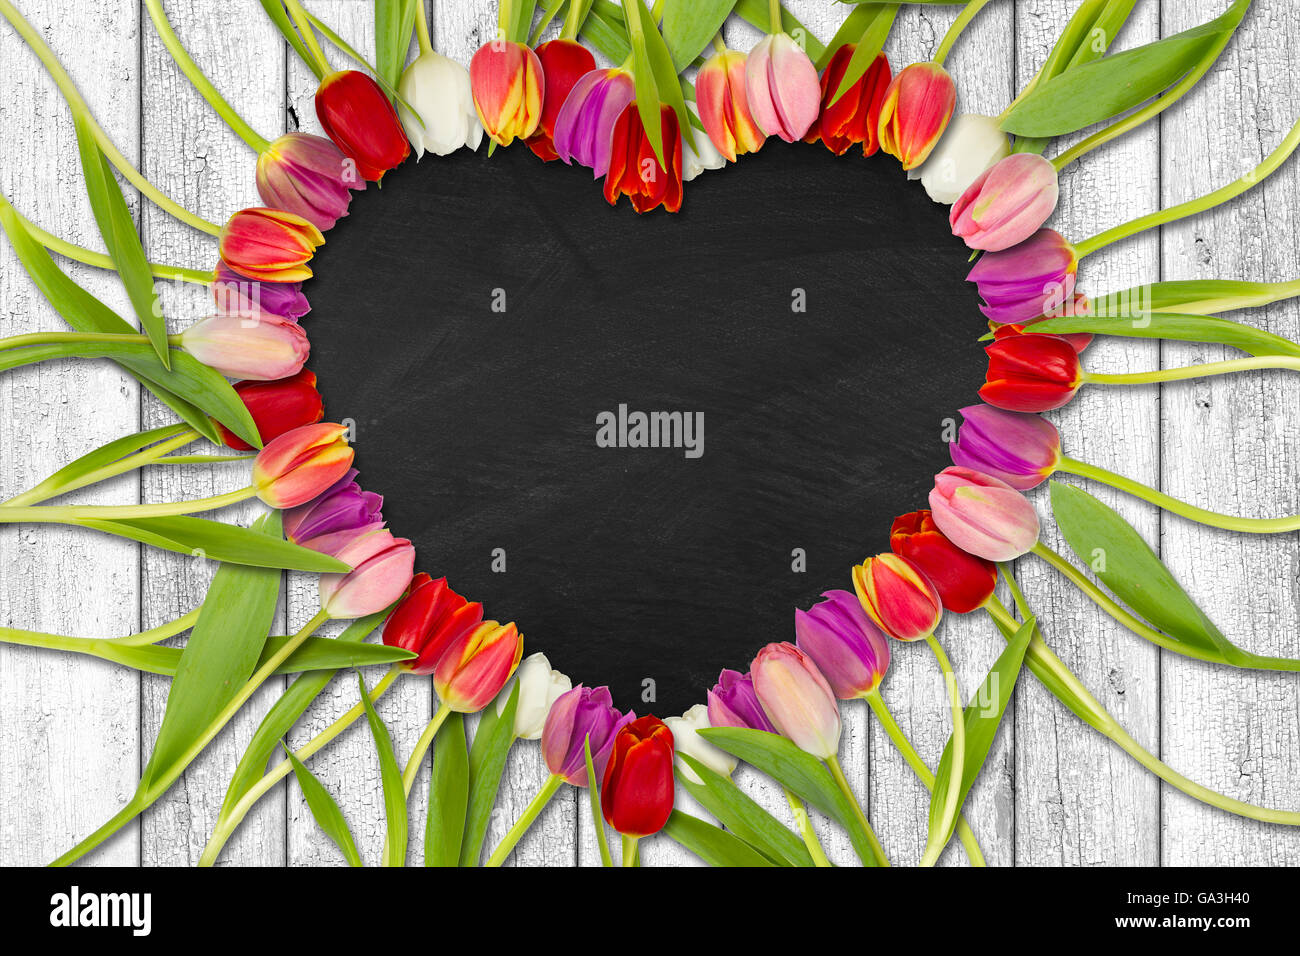 heart shaped out of tulips on white wooden background with slate Stock Photo